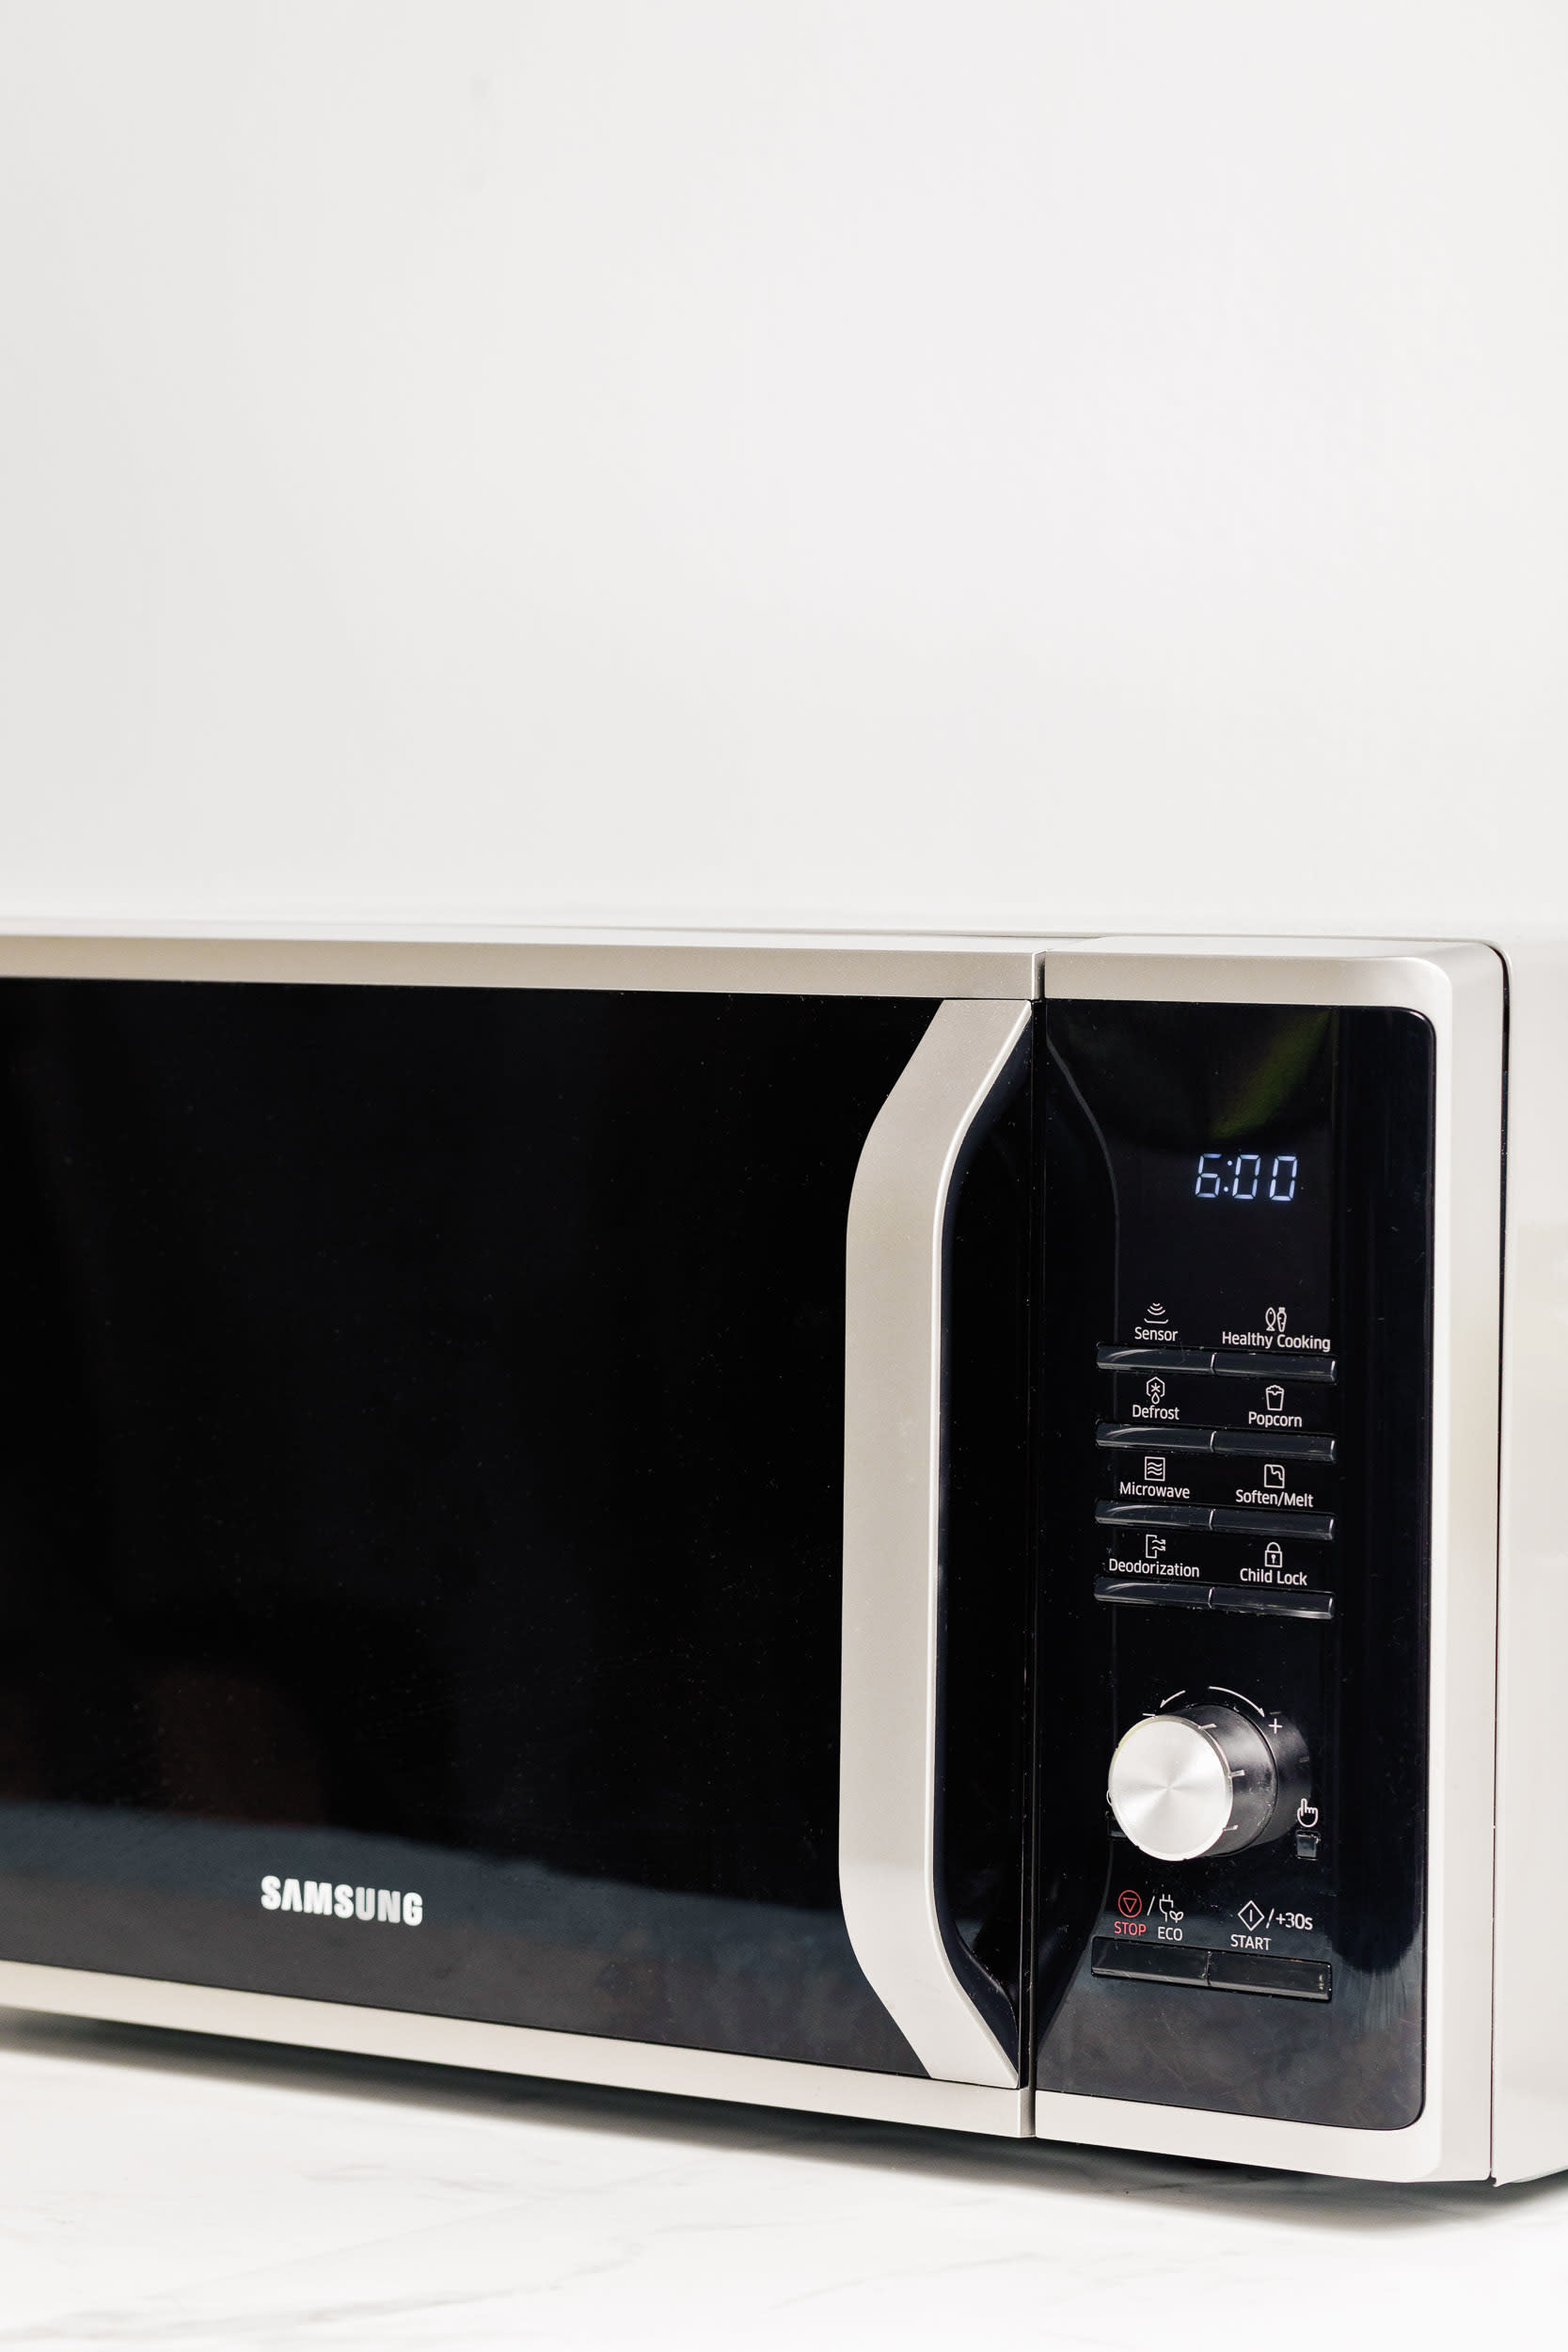 How to Get Rid of Burnt Smell Out of Microwave in a Few Minutes